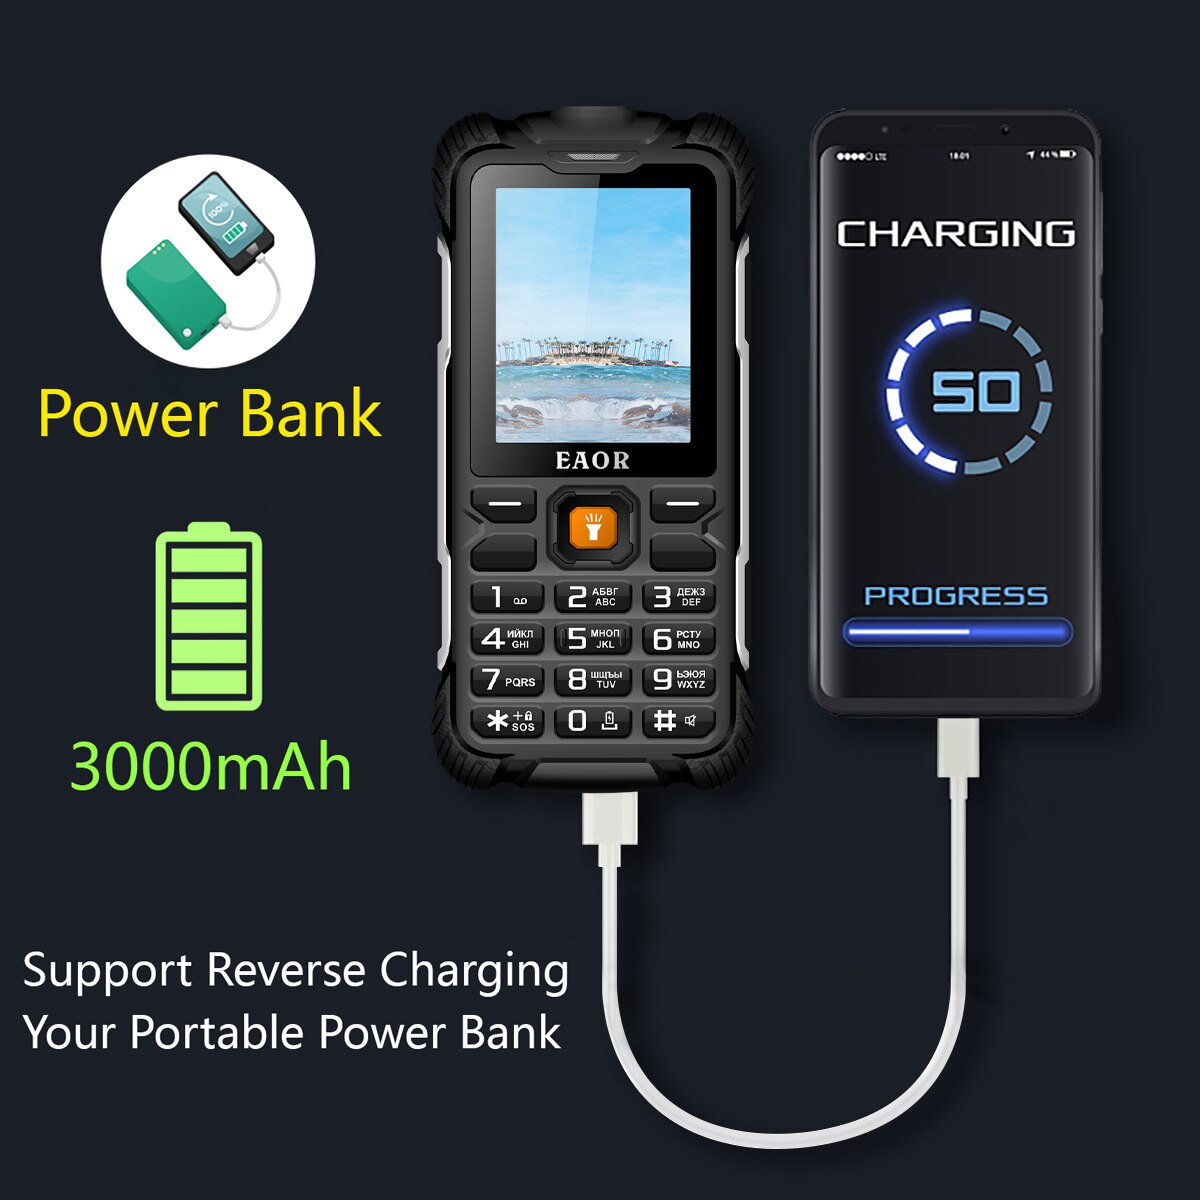 EAOR 2G Rugged Phone 3000mAh Power Bank Long Standby IP68 Water/Dust-proof Push-button Phones Torch Keypad Phones Feature Phones